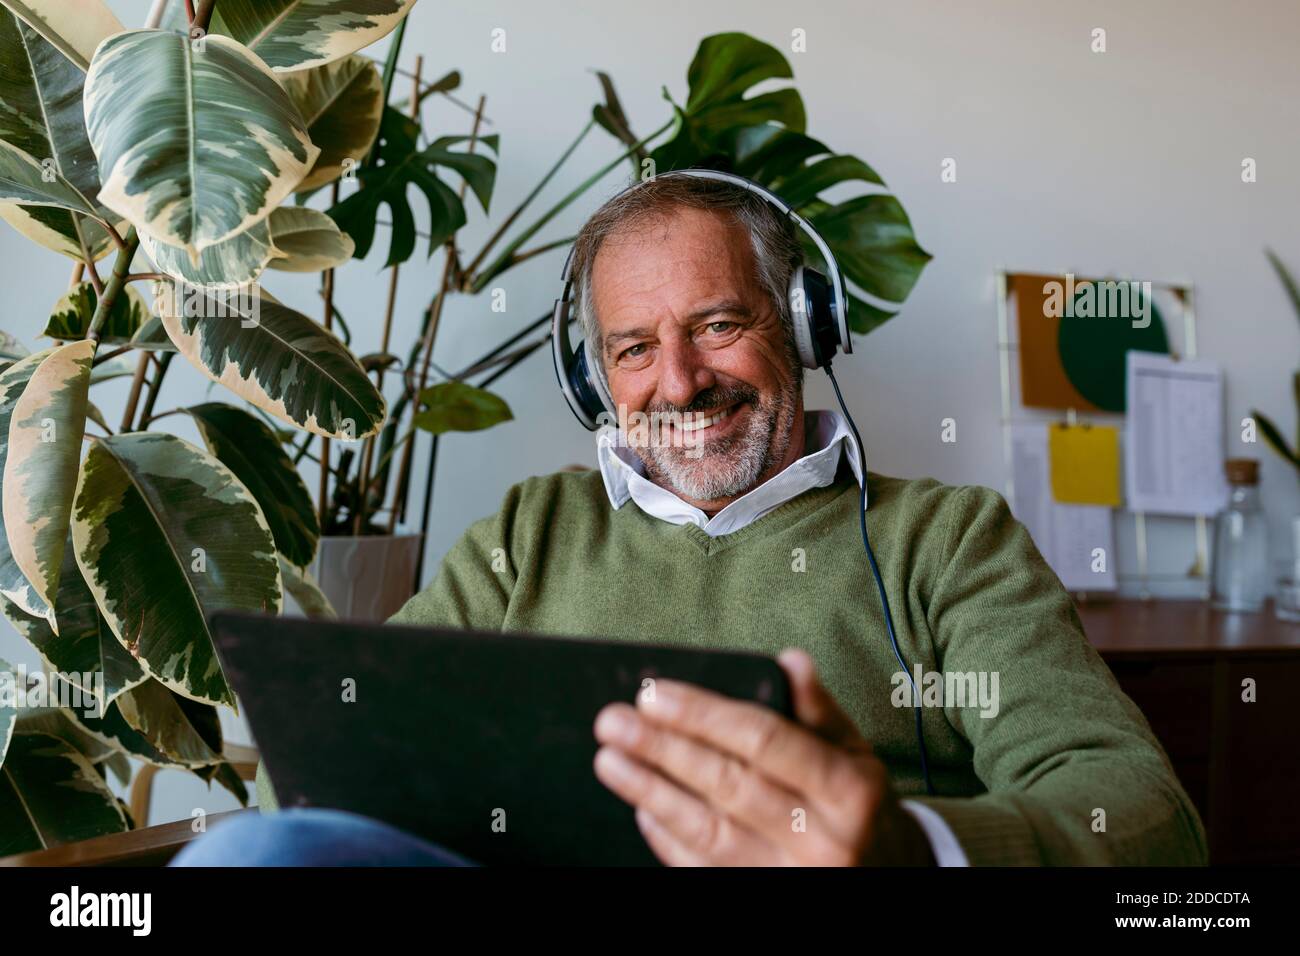 Mature men wearing headphones while using digital tablet at home Stock Photo